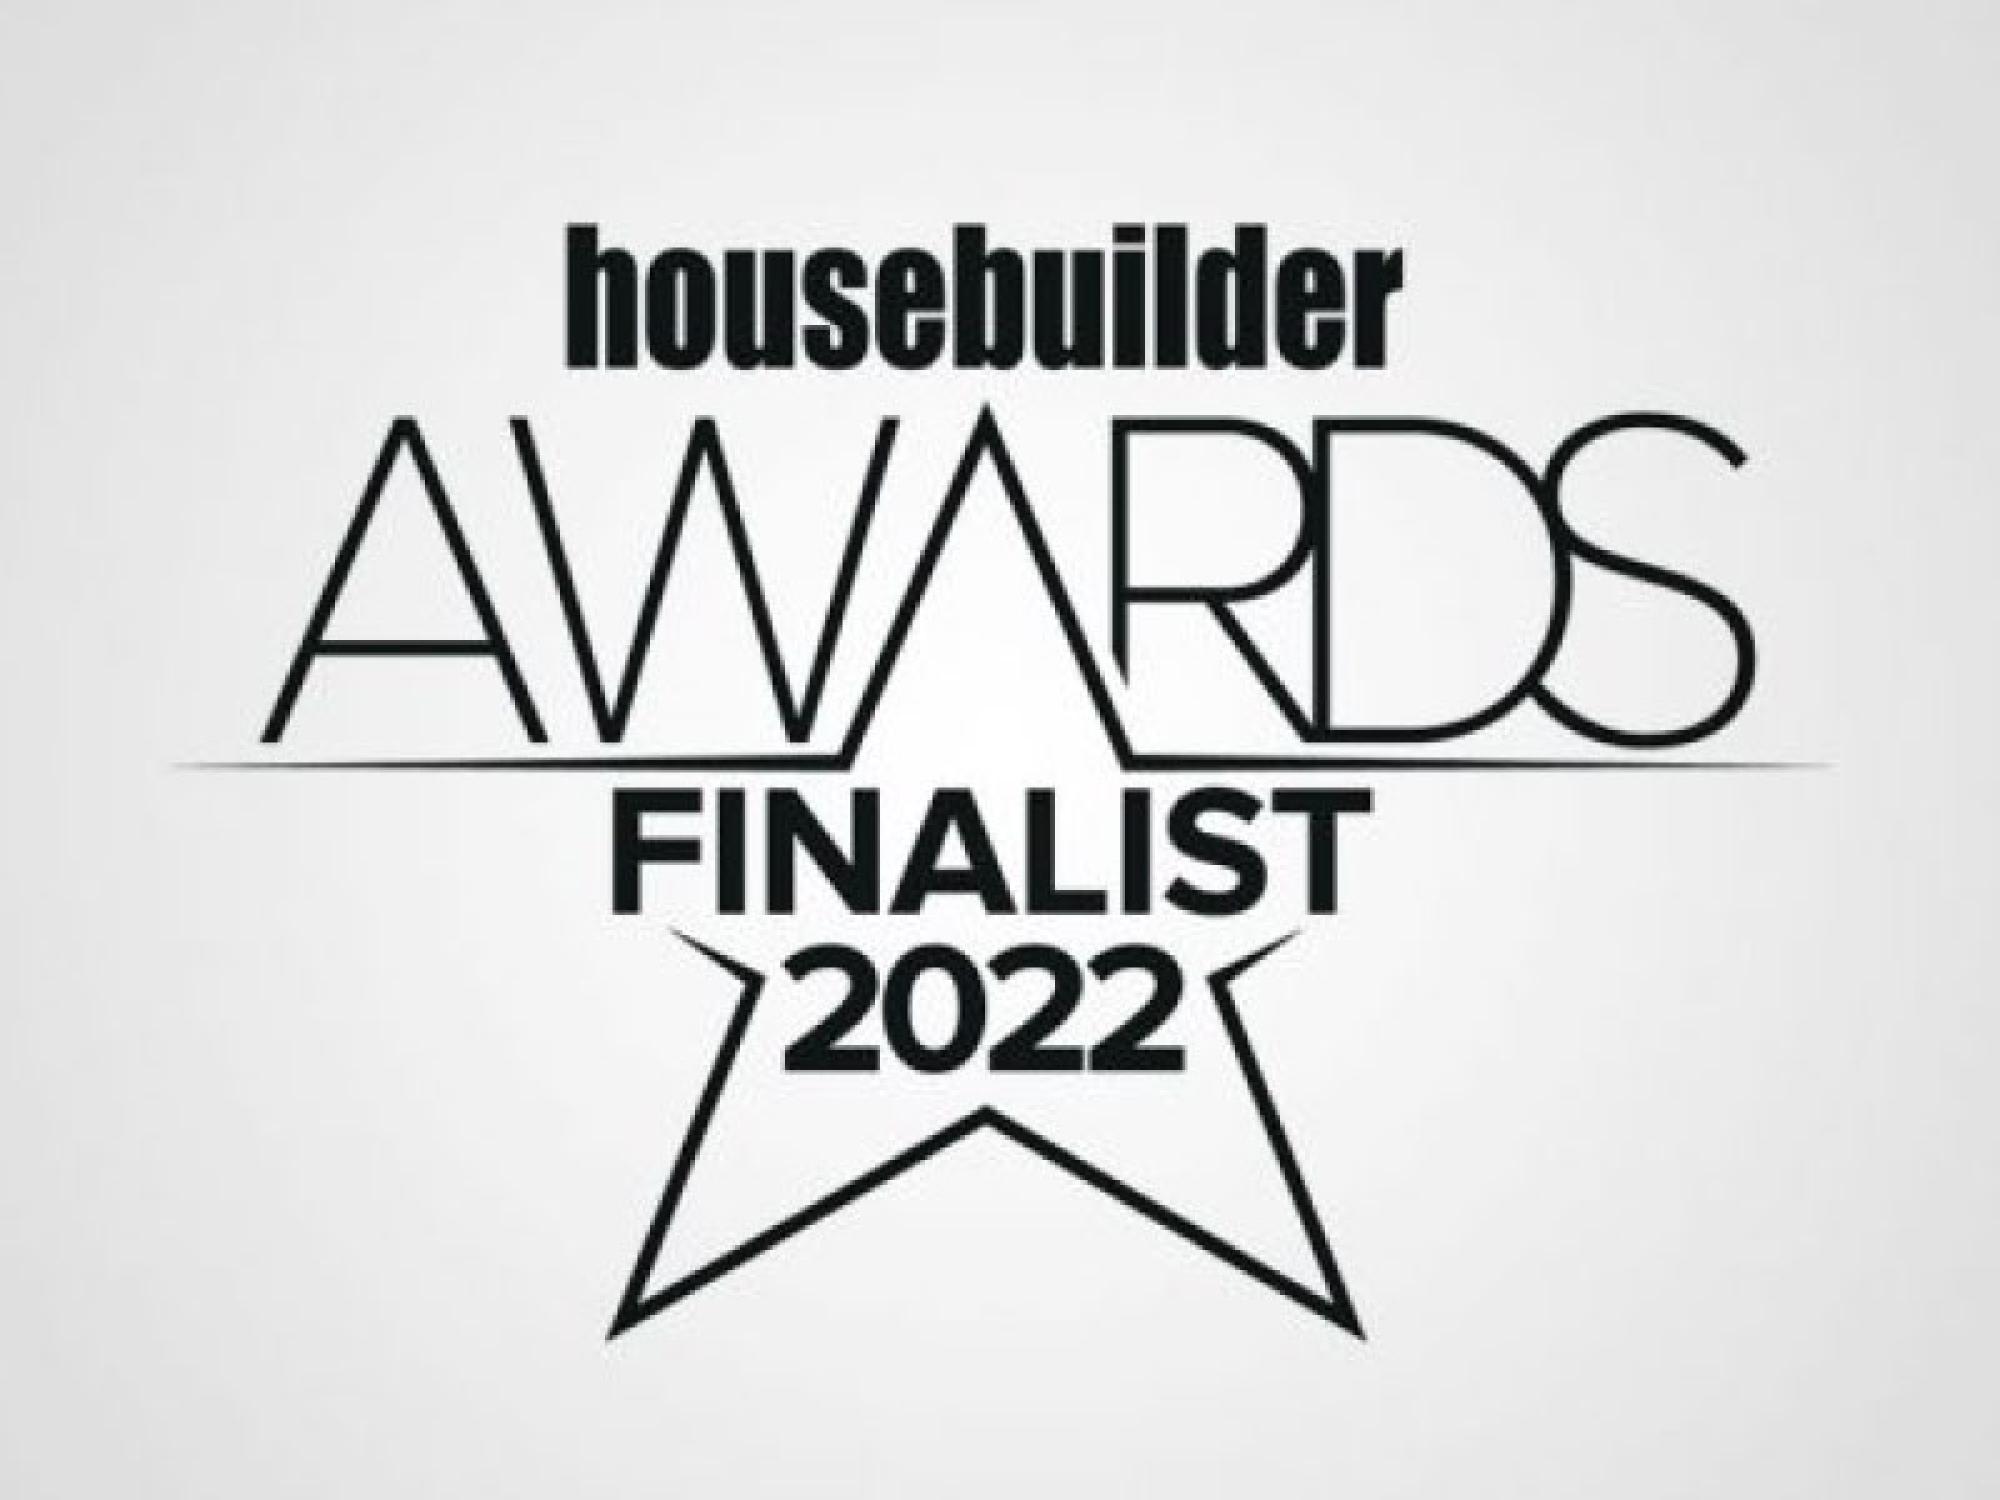 McAuliffe has been shortlisted for Subcontractor/Services Provider of the Year at the Housebuilder Awards 2022